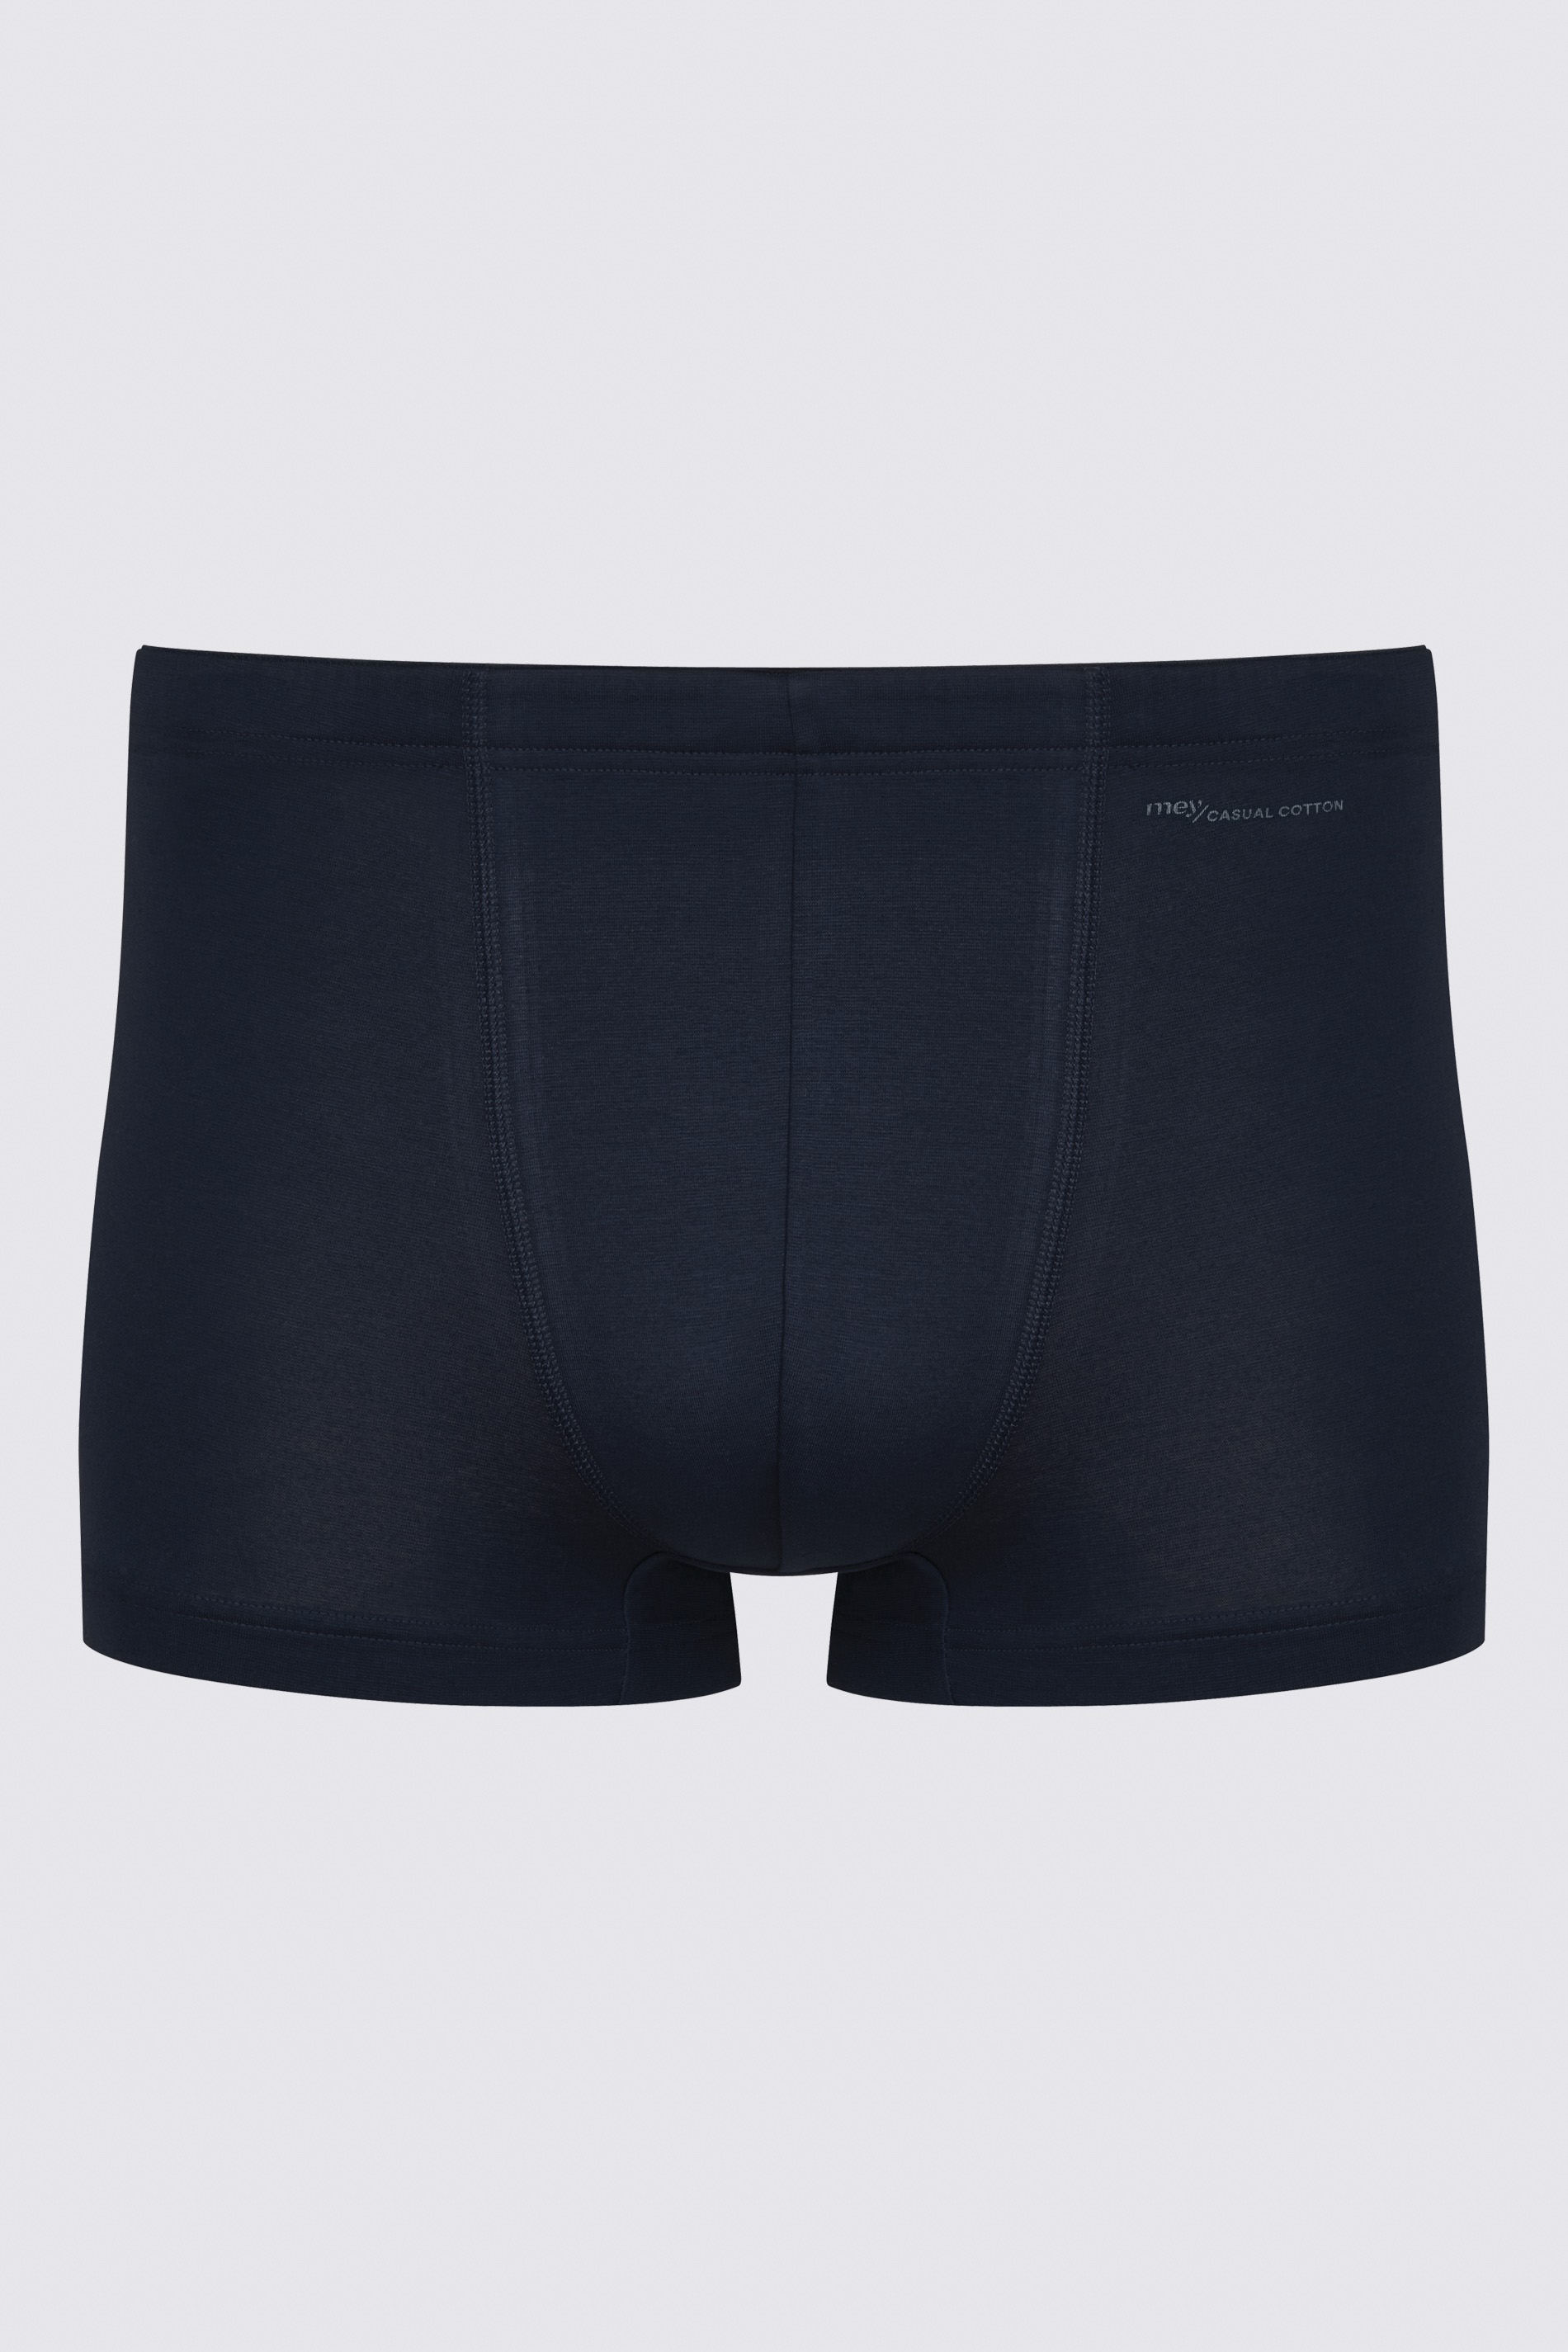 Shorty Yacht Blue Serie Casual Cotton Cut Out | mey®